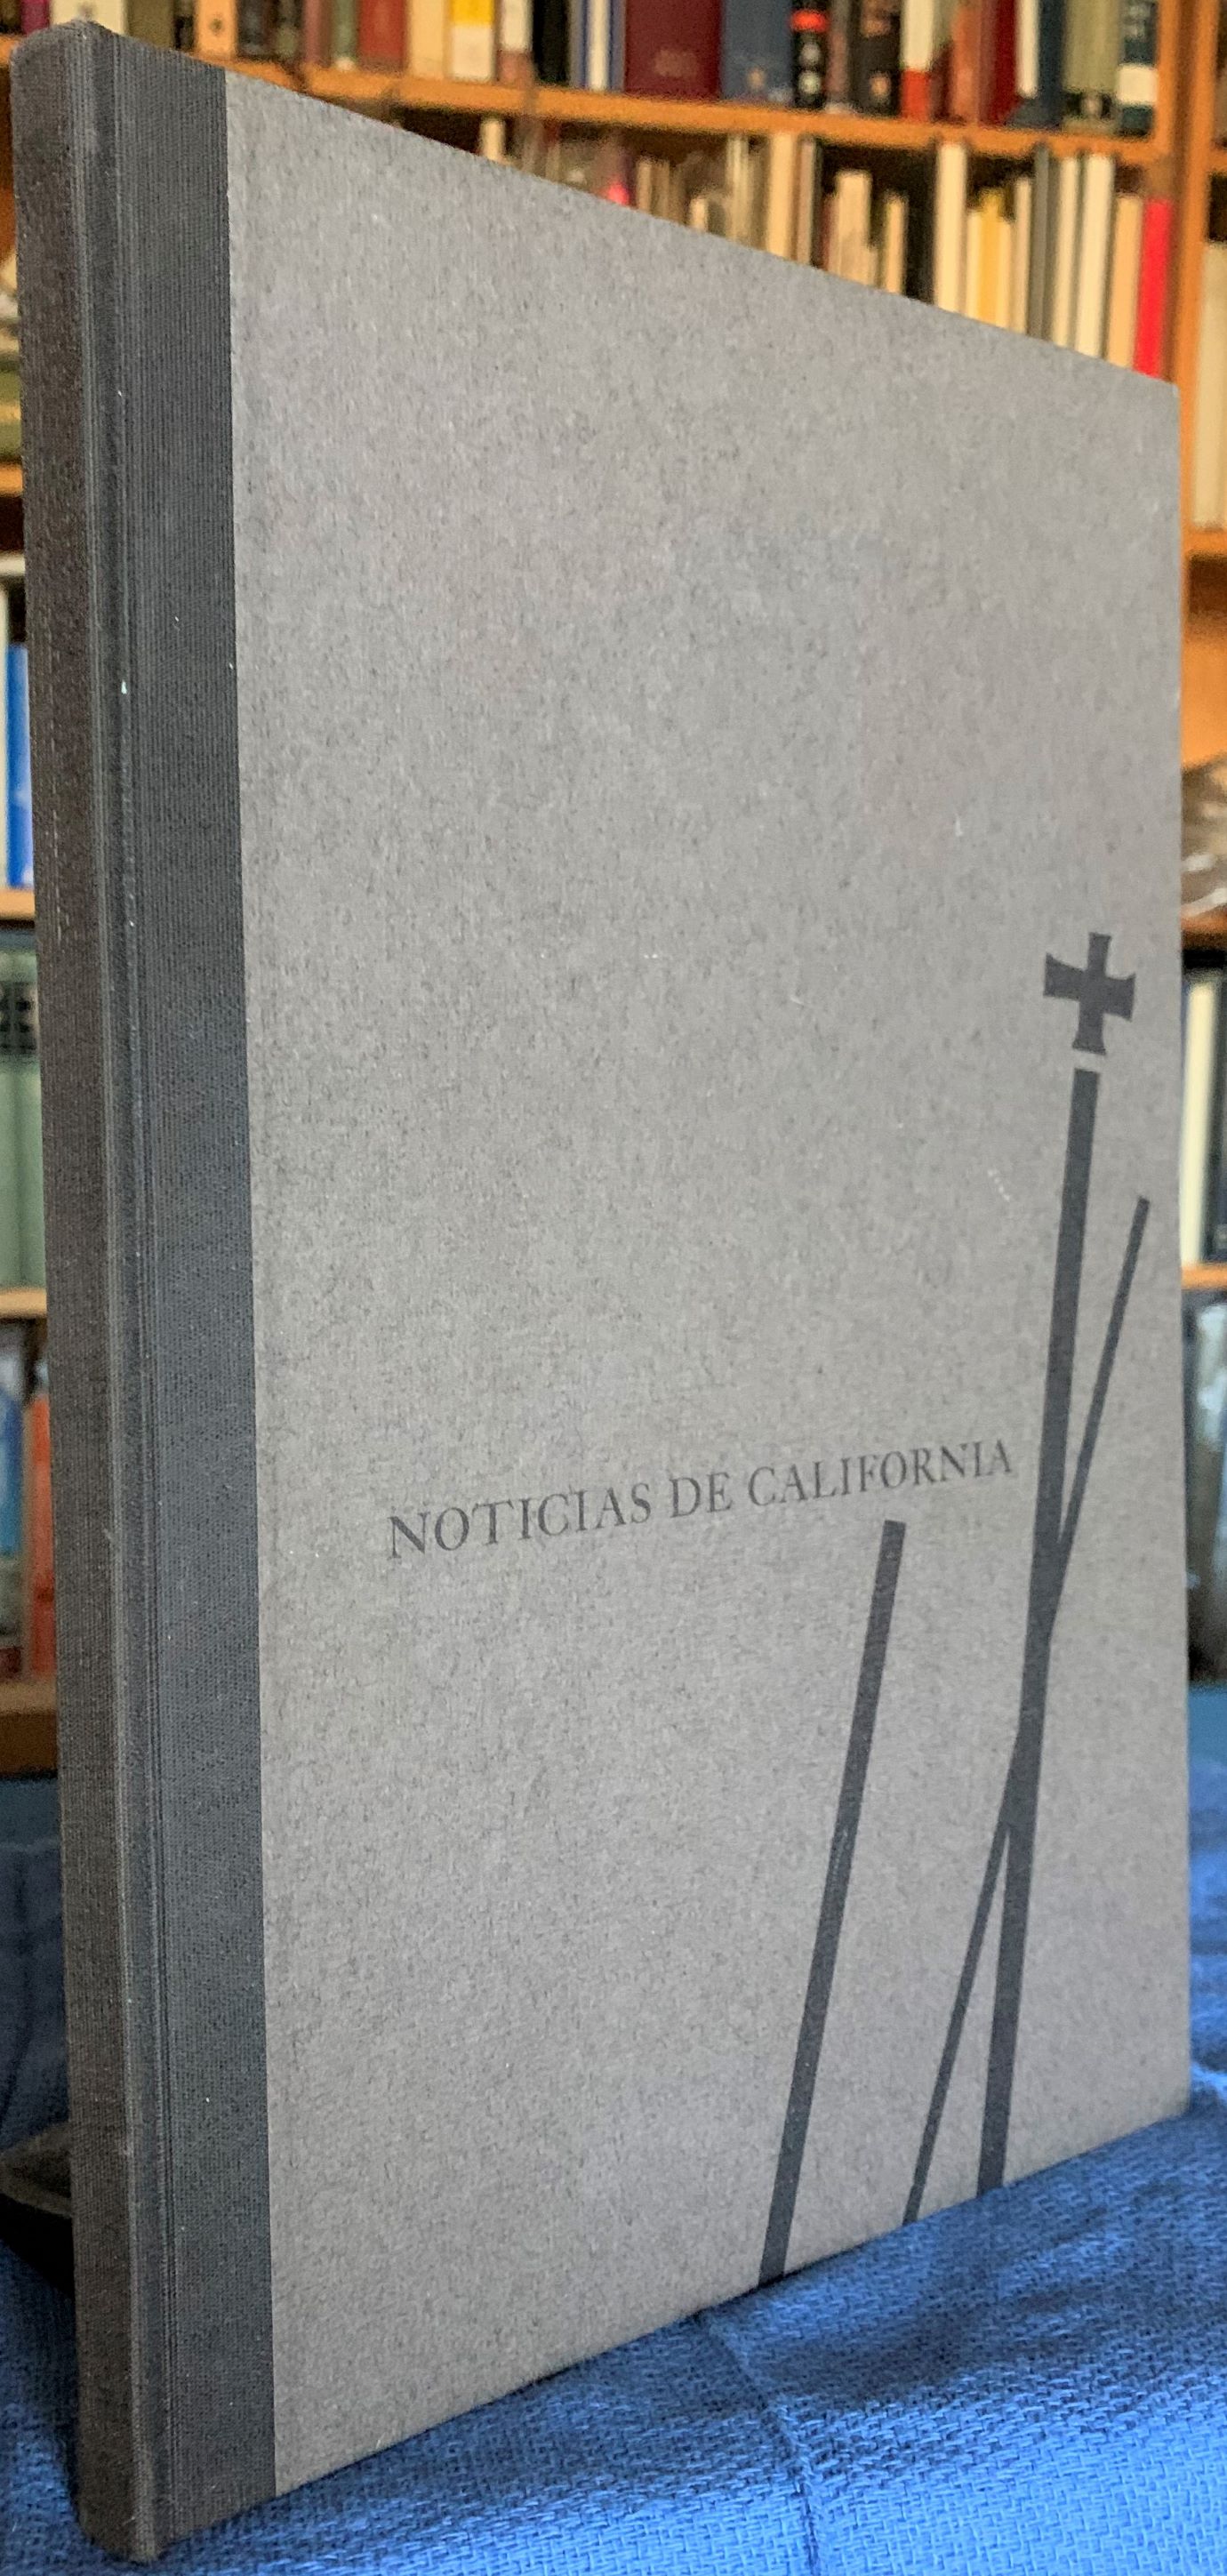 Image for Noticias de California : first report of the occupation by the Portola Expedition, 1770, with facsimiles of the original printings, a new translation, contemporary maps, and a narrative of how it all came to pass. [Inscribed by the author]